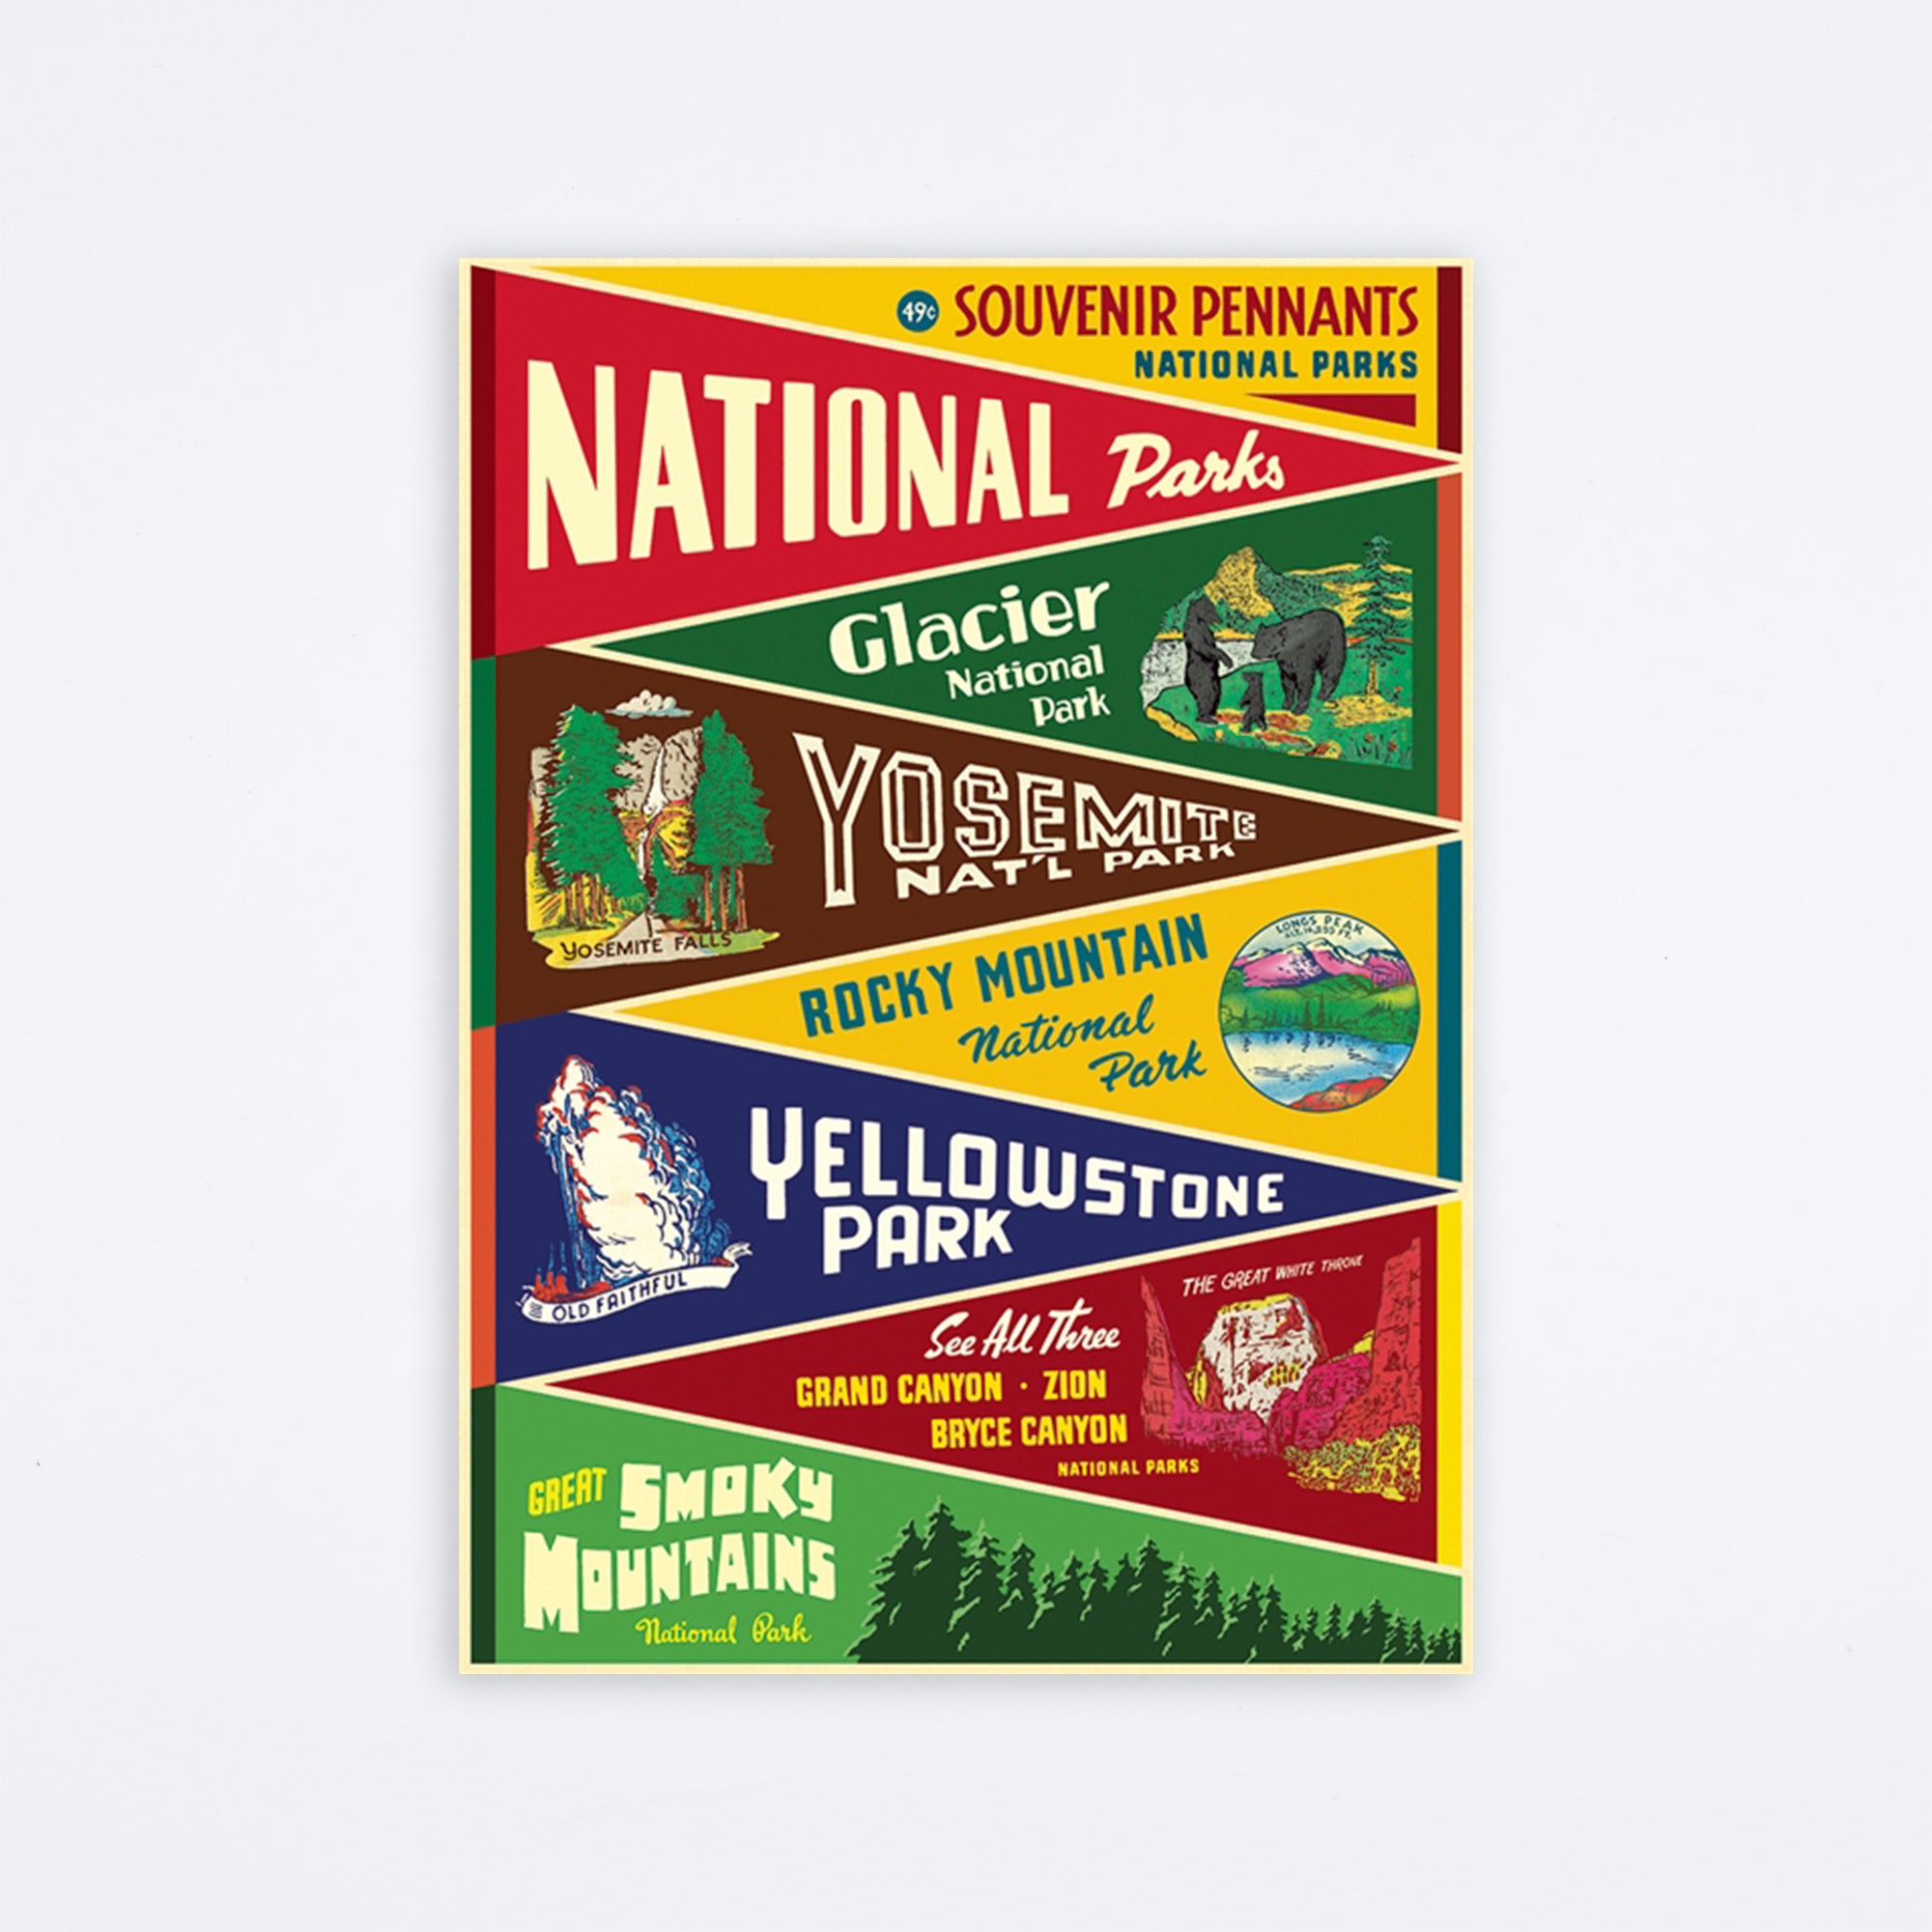 National Parks Pennants Wrap